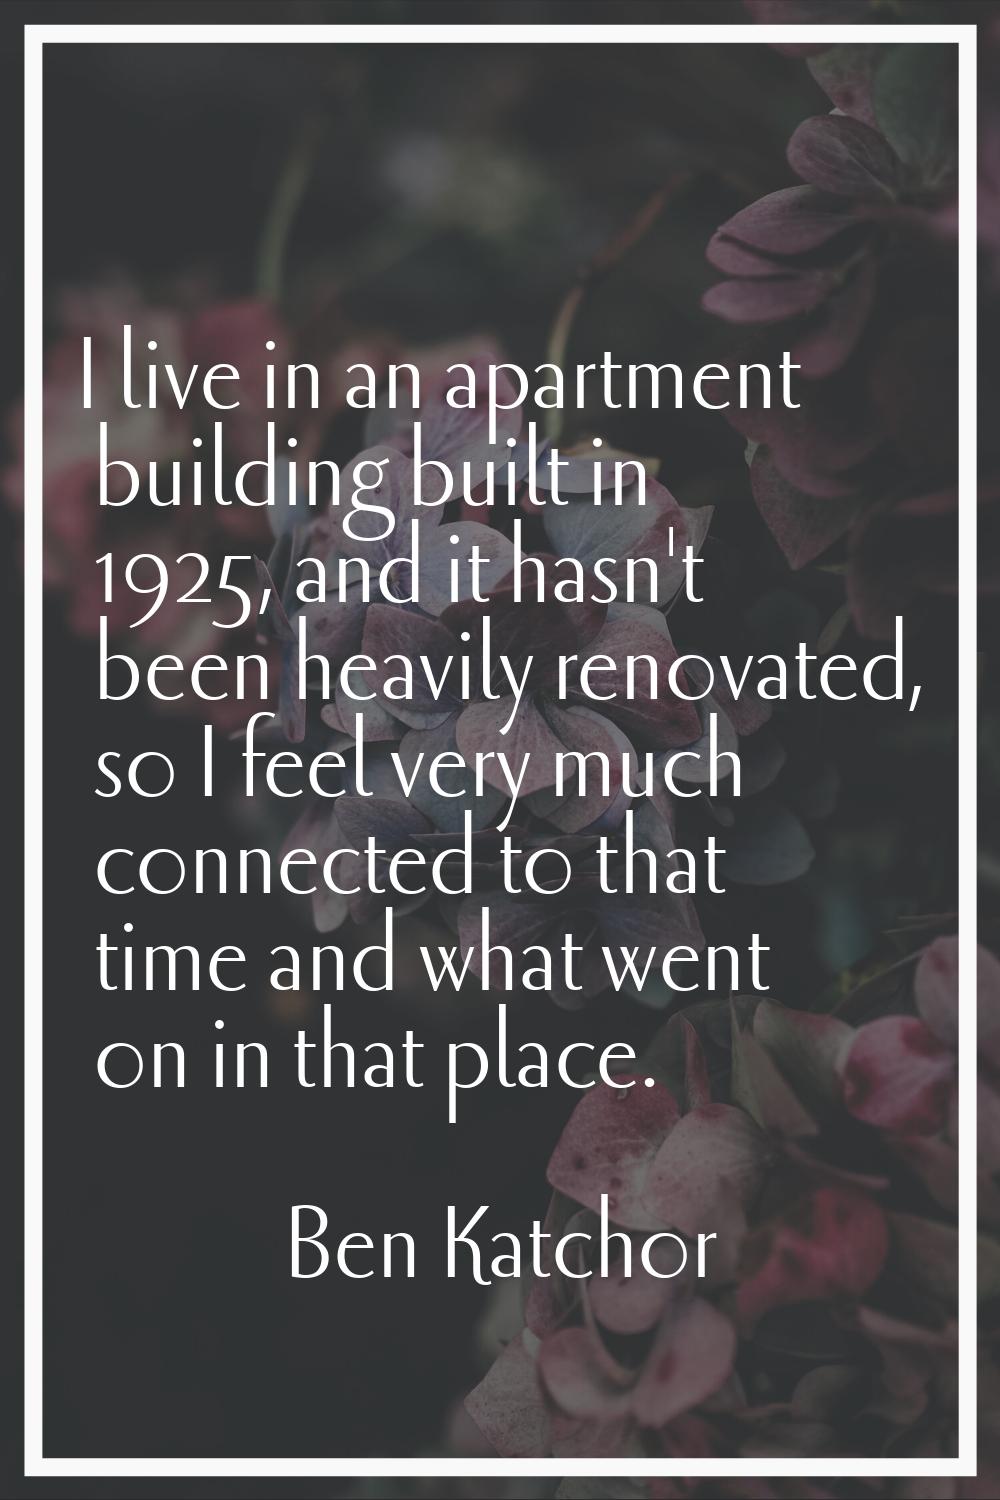 I live in an apartment building built in 1925, and it hasn't been heavily renovated, so I feel very